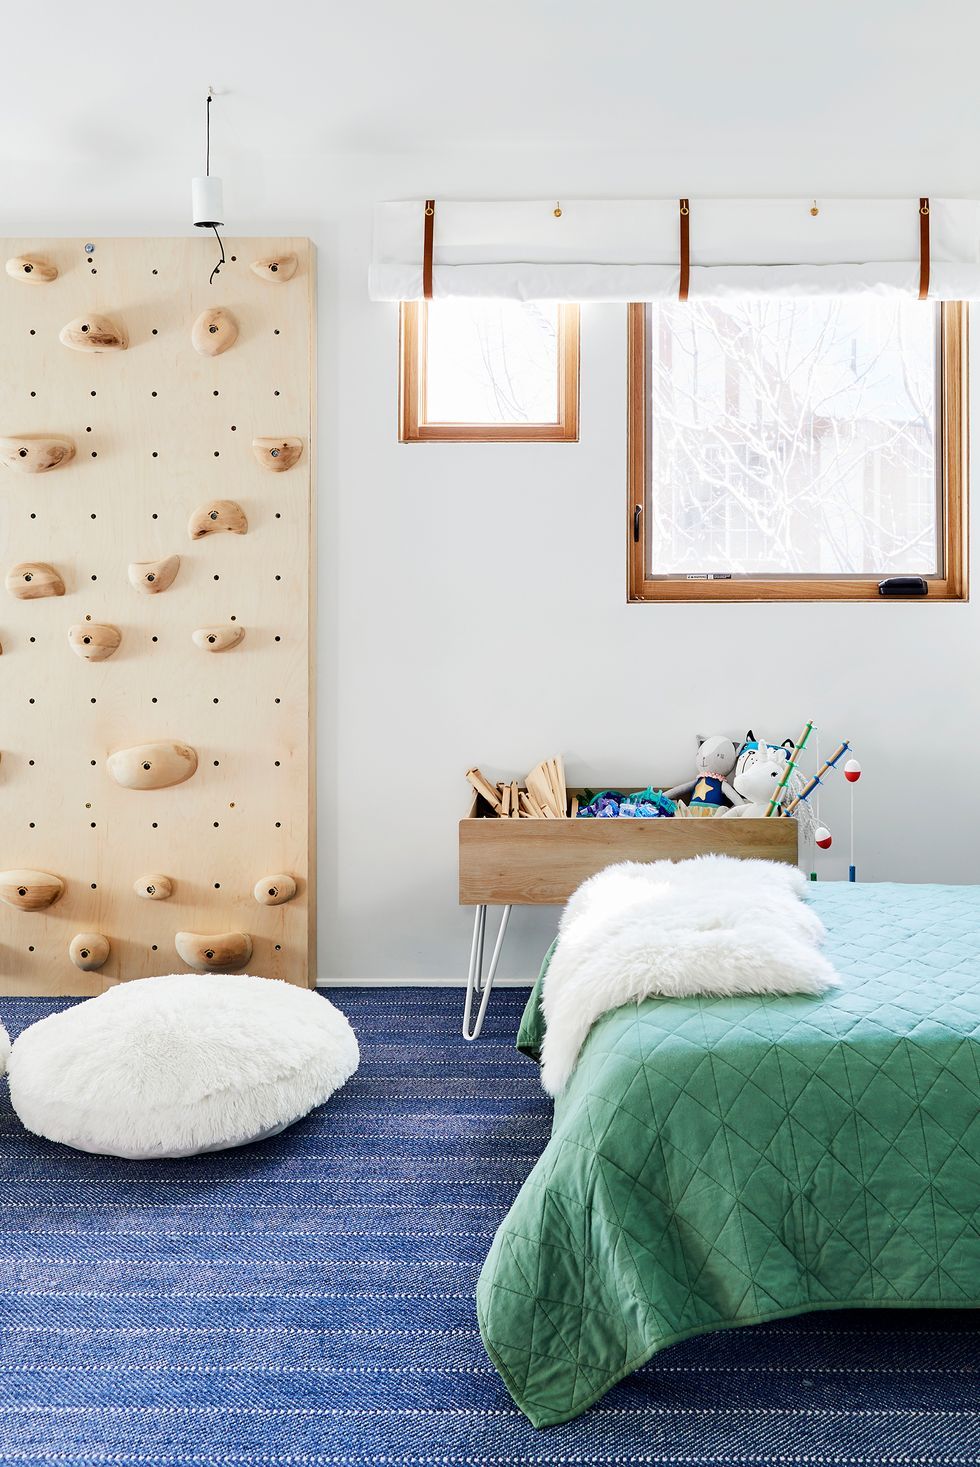 55 Kids Room Design Ideas Cool, Is A Full Size Bed Too Big For 2 Year Old